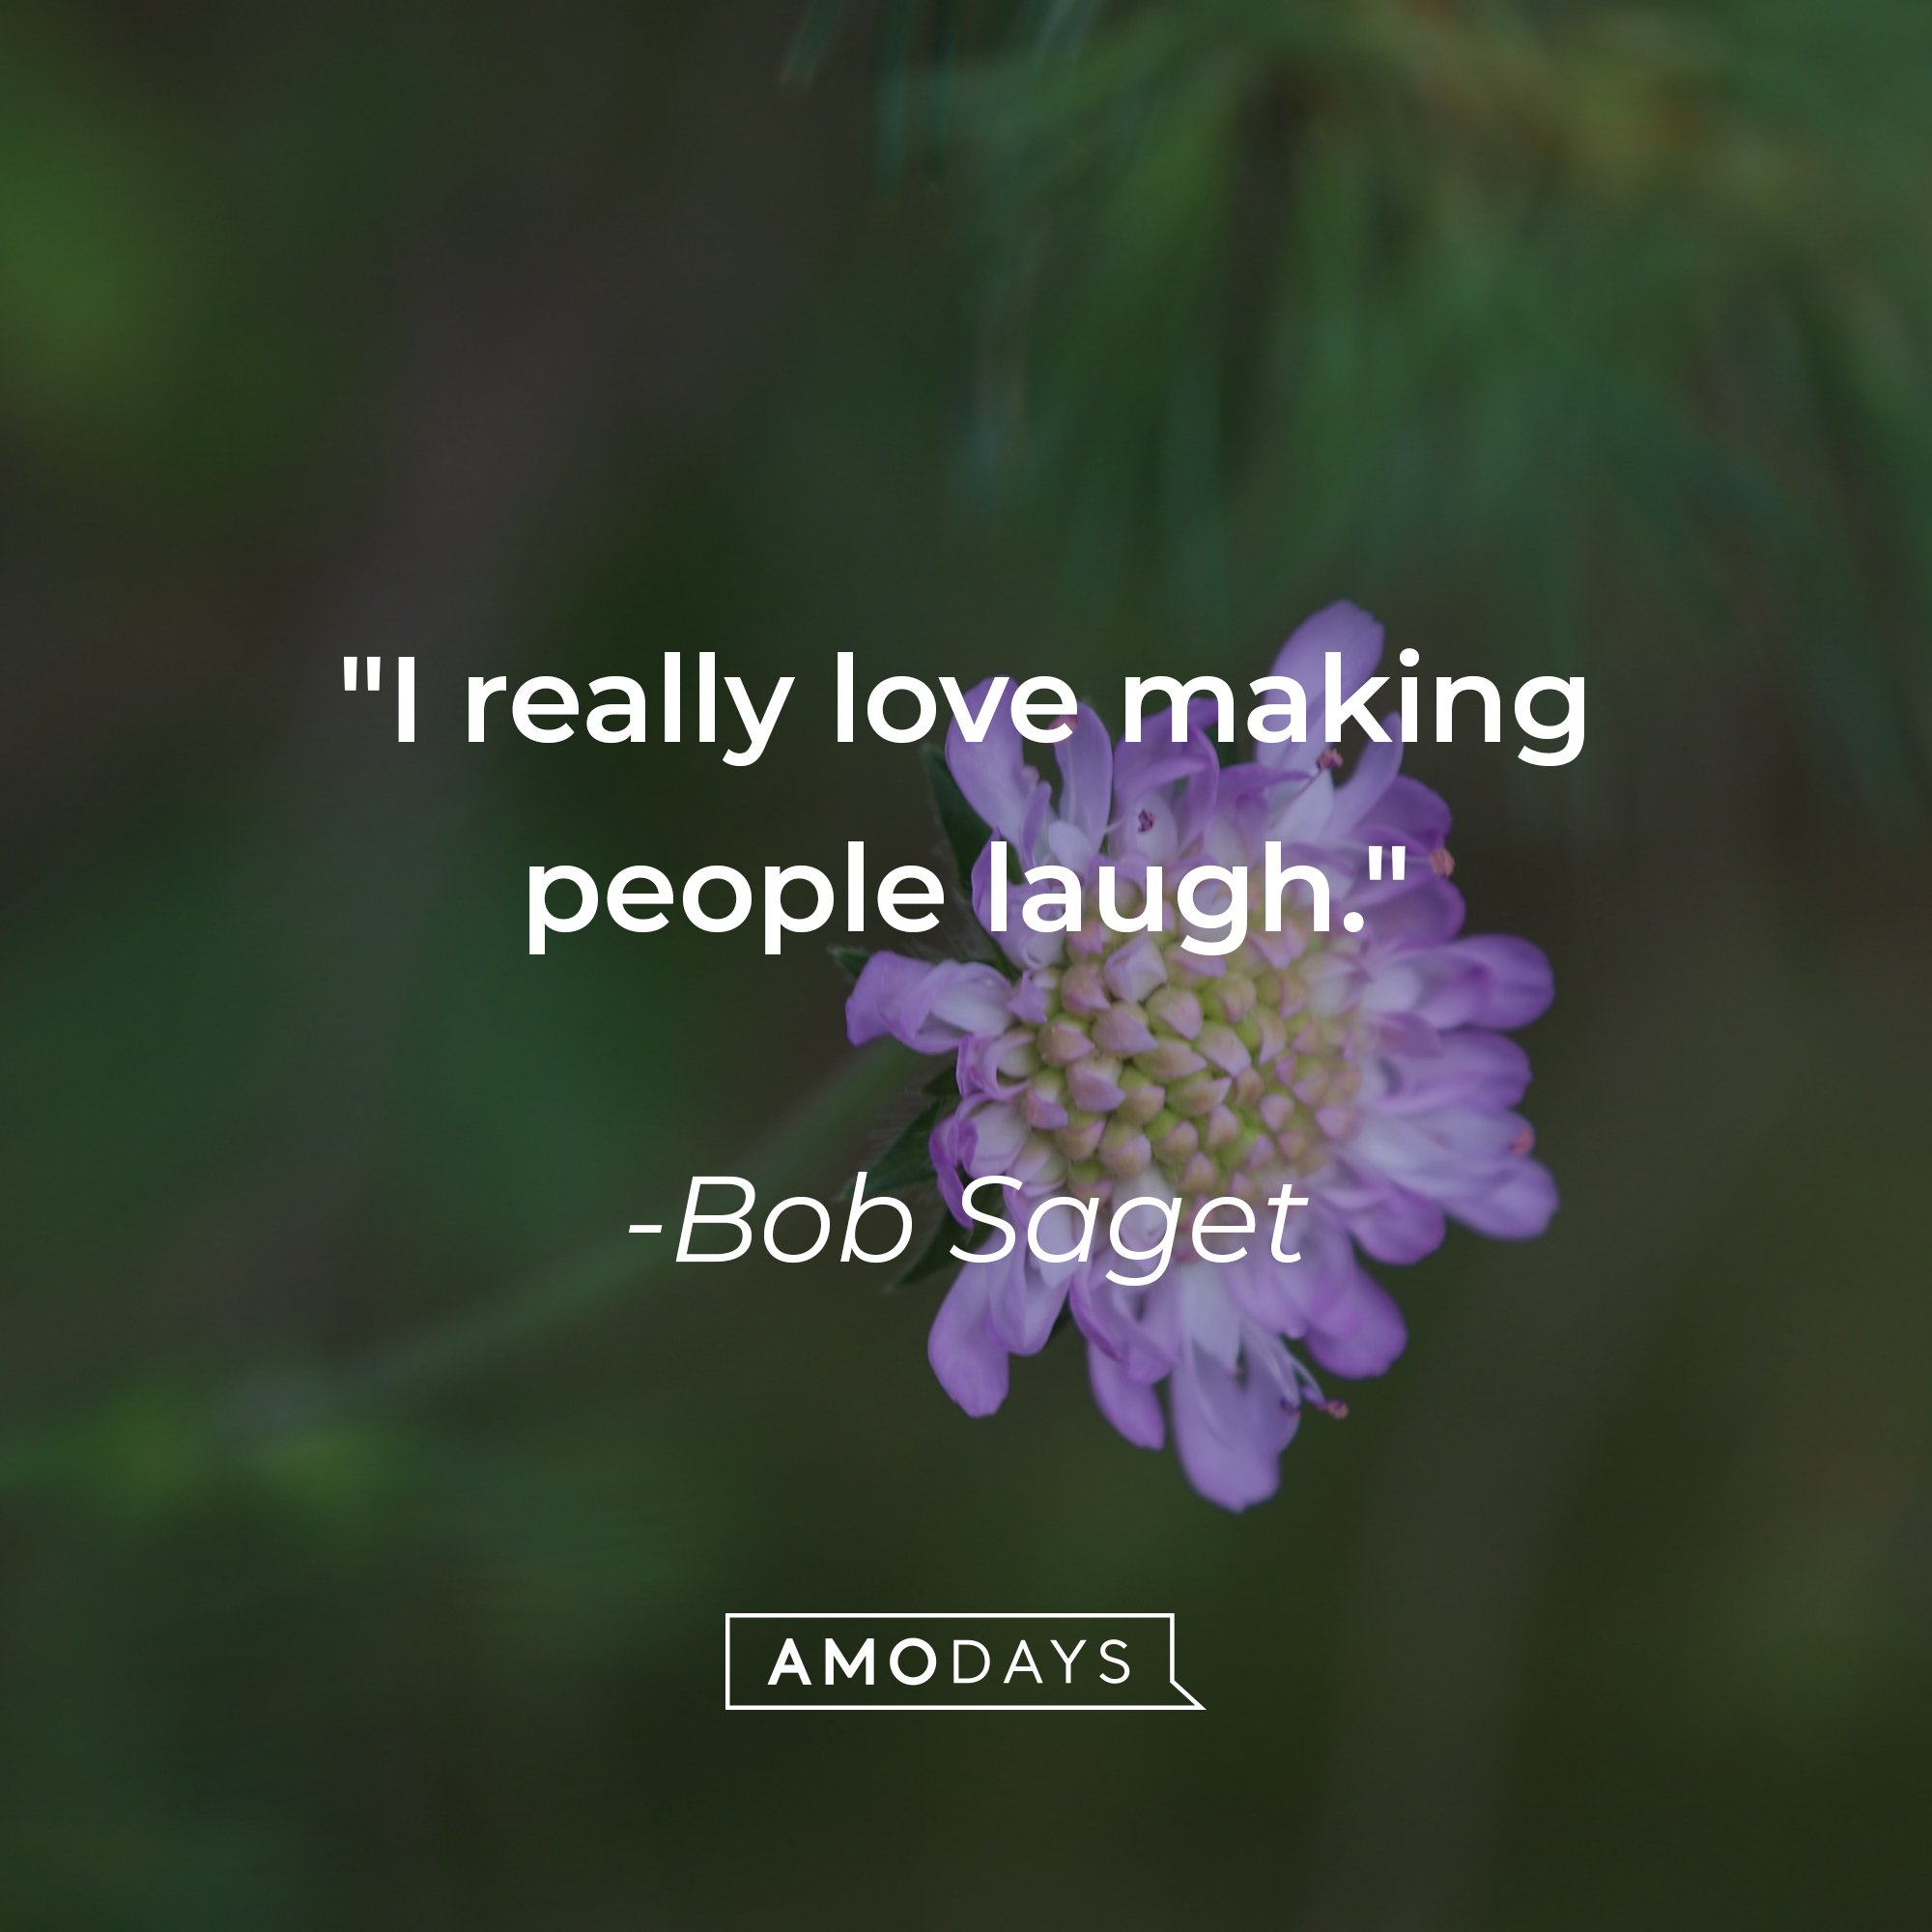 Bob Saget’s quote: "I really love making people laugh." | Image: AmoDays